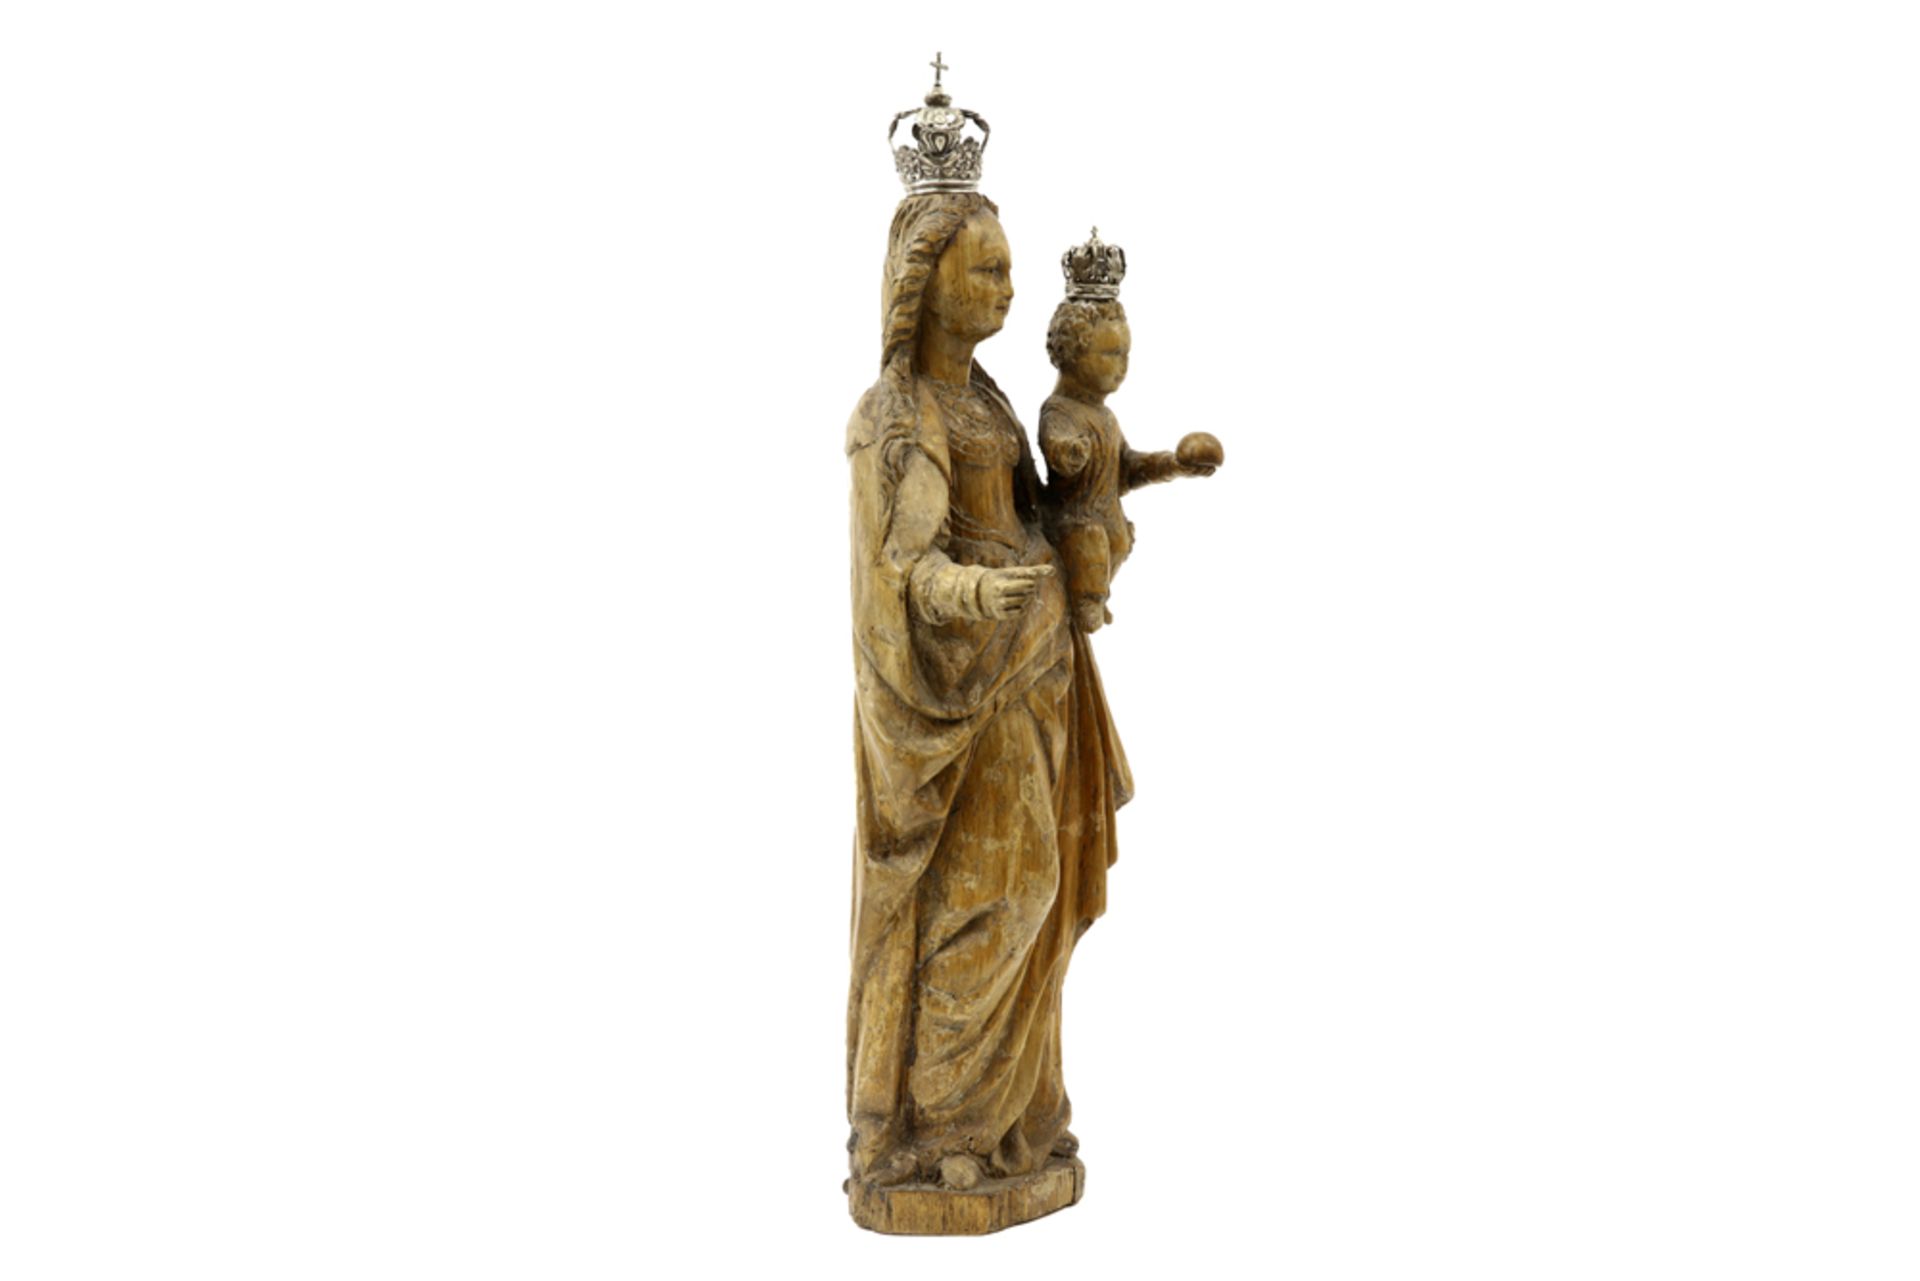 16th/17th Cent. Flemish "Holy Mary with Child" sculpture from Malines - with two silver crowns || - Bild 2 aus 4